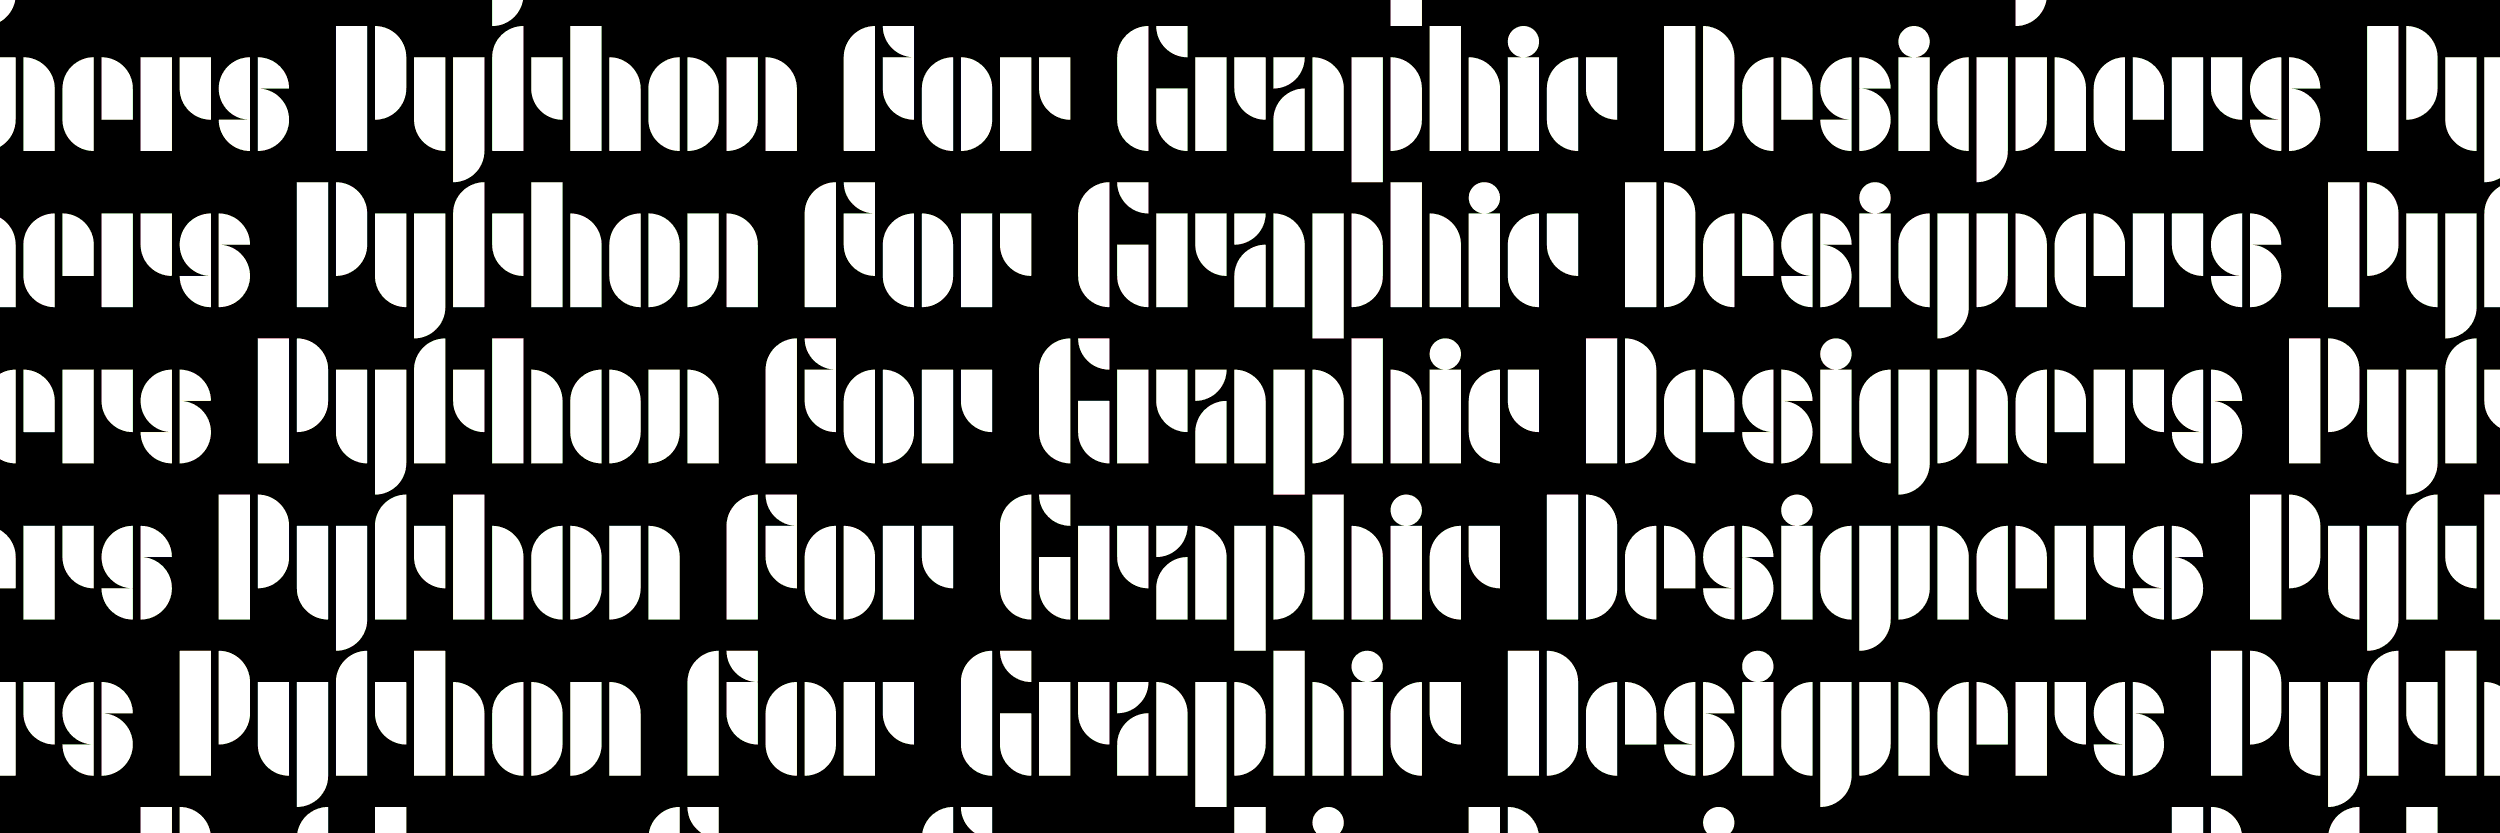 Python for Graphic Designers with Maurice Meilleur